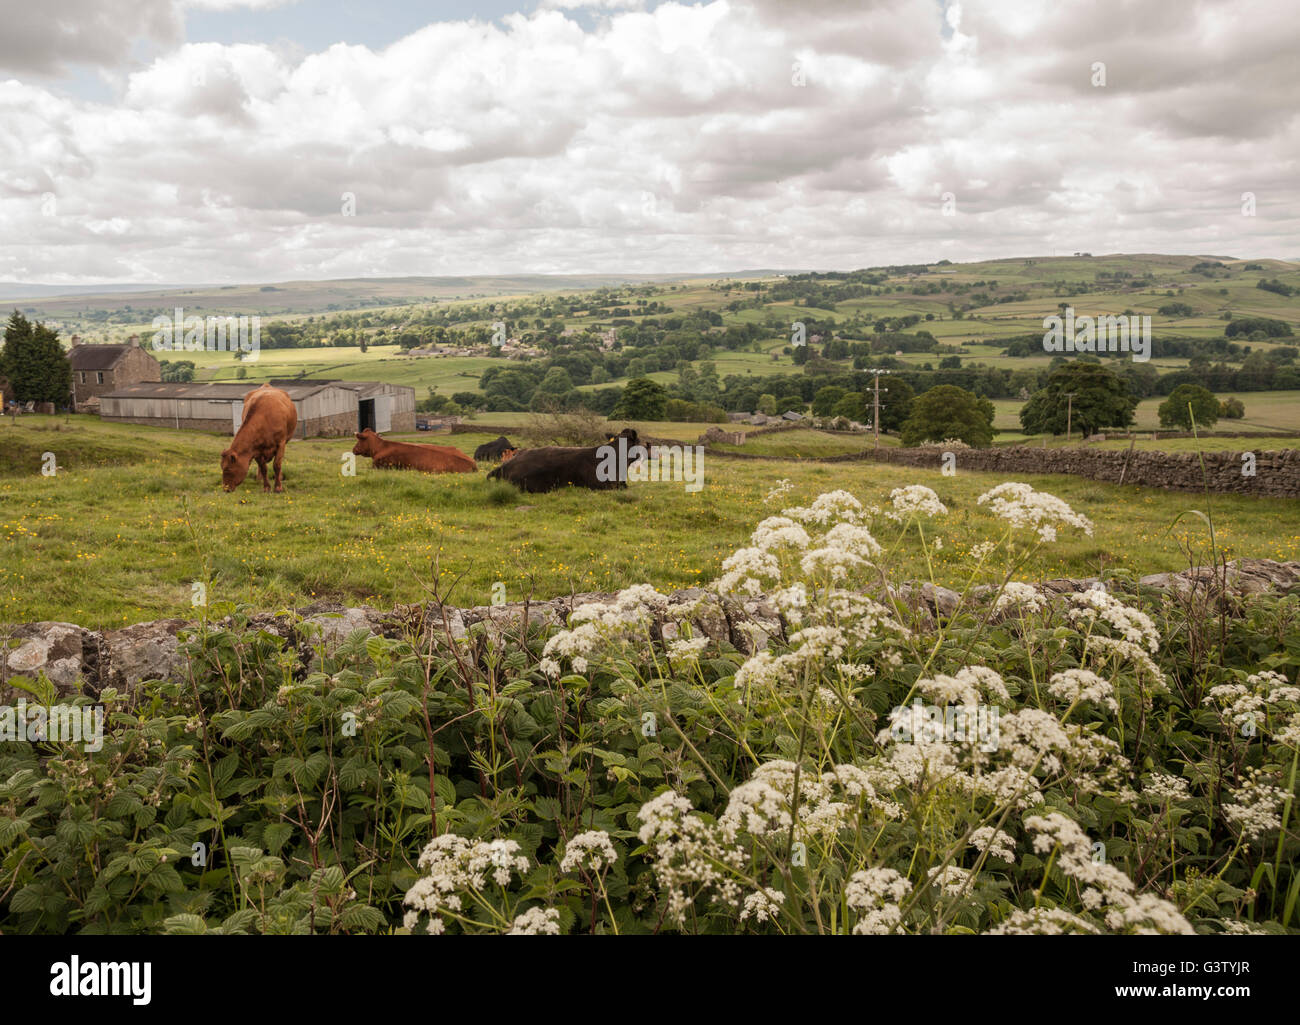 A scenic view of Middleton-in-Teesdale area in County Durham,England with grazing cattle, rolling hills and grassy meadows Stock Photo